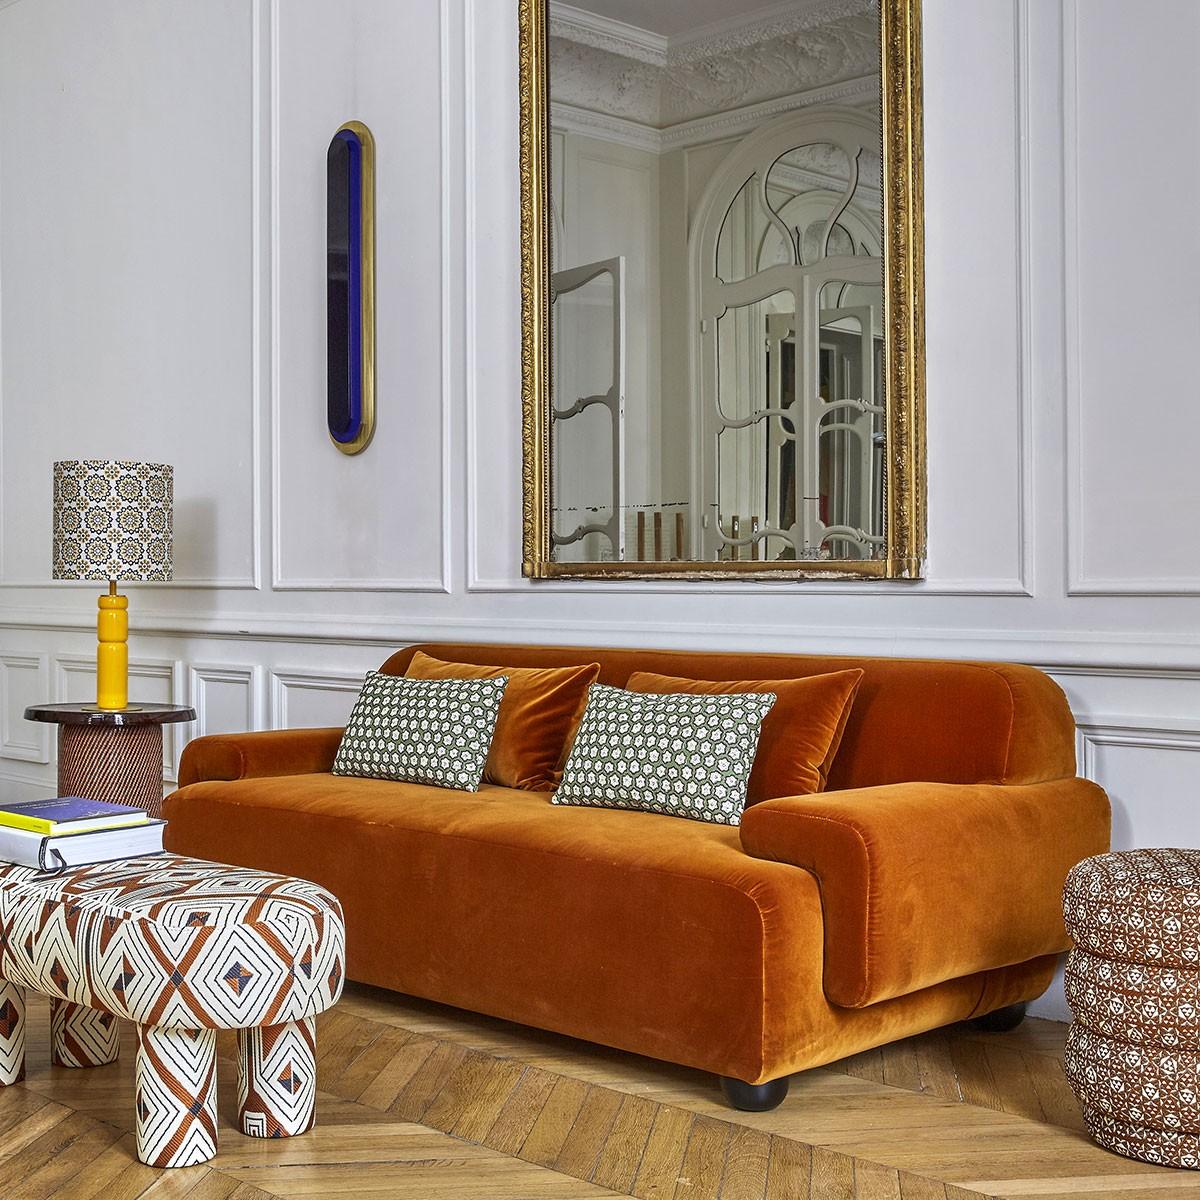 Popus Editions lena 4 seater sofa in yellow como velvet upholstery

It looks like it's straight out of a movie, with its generous curves and wide armrests. It is a real invitation to spend long Sundays with the family, comfortably seated in front